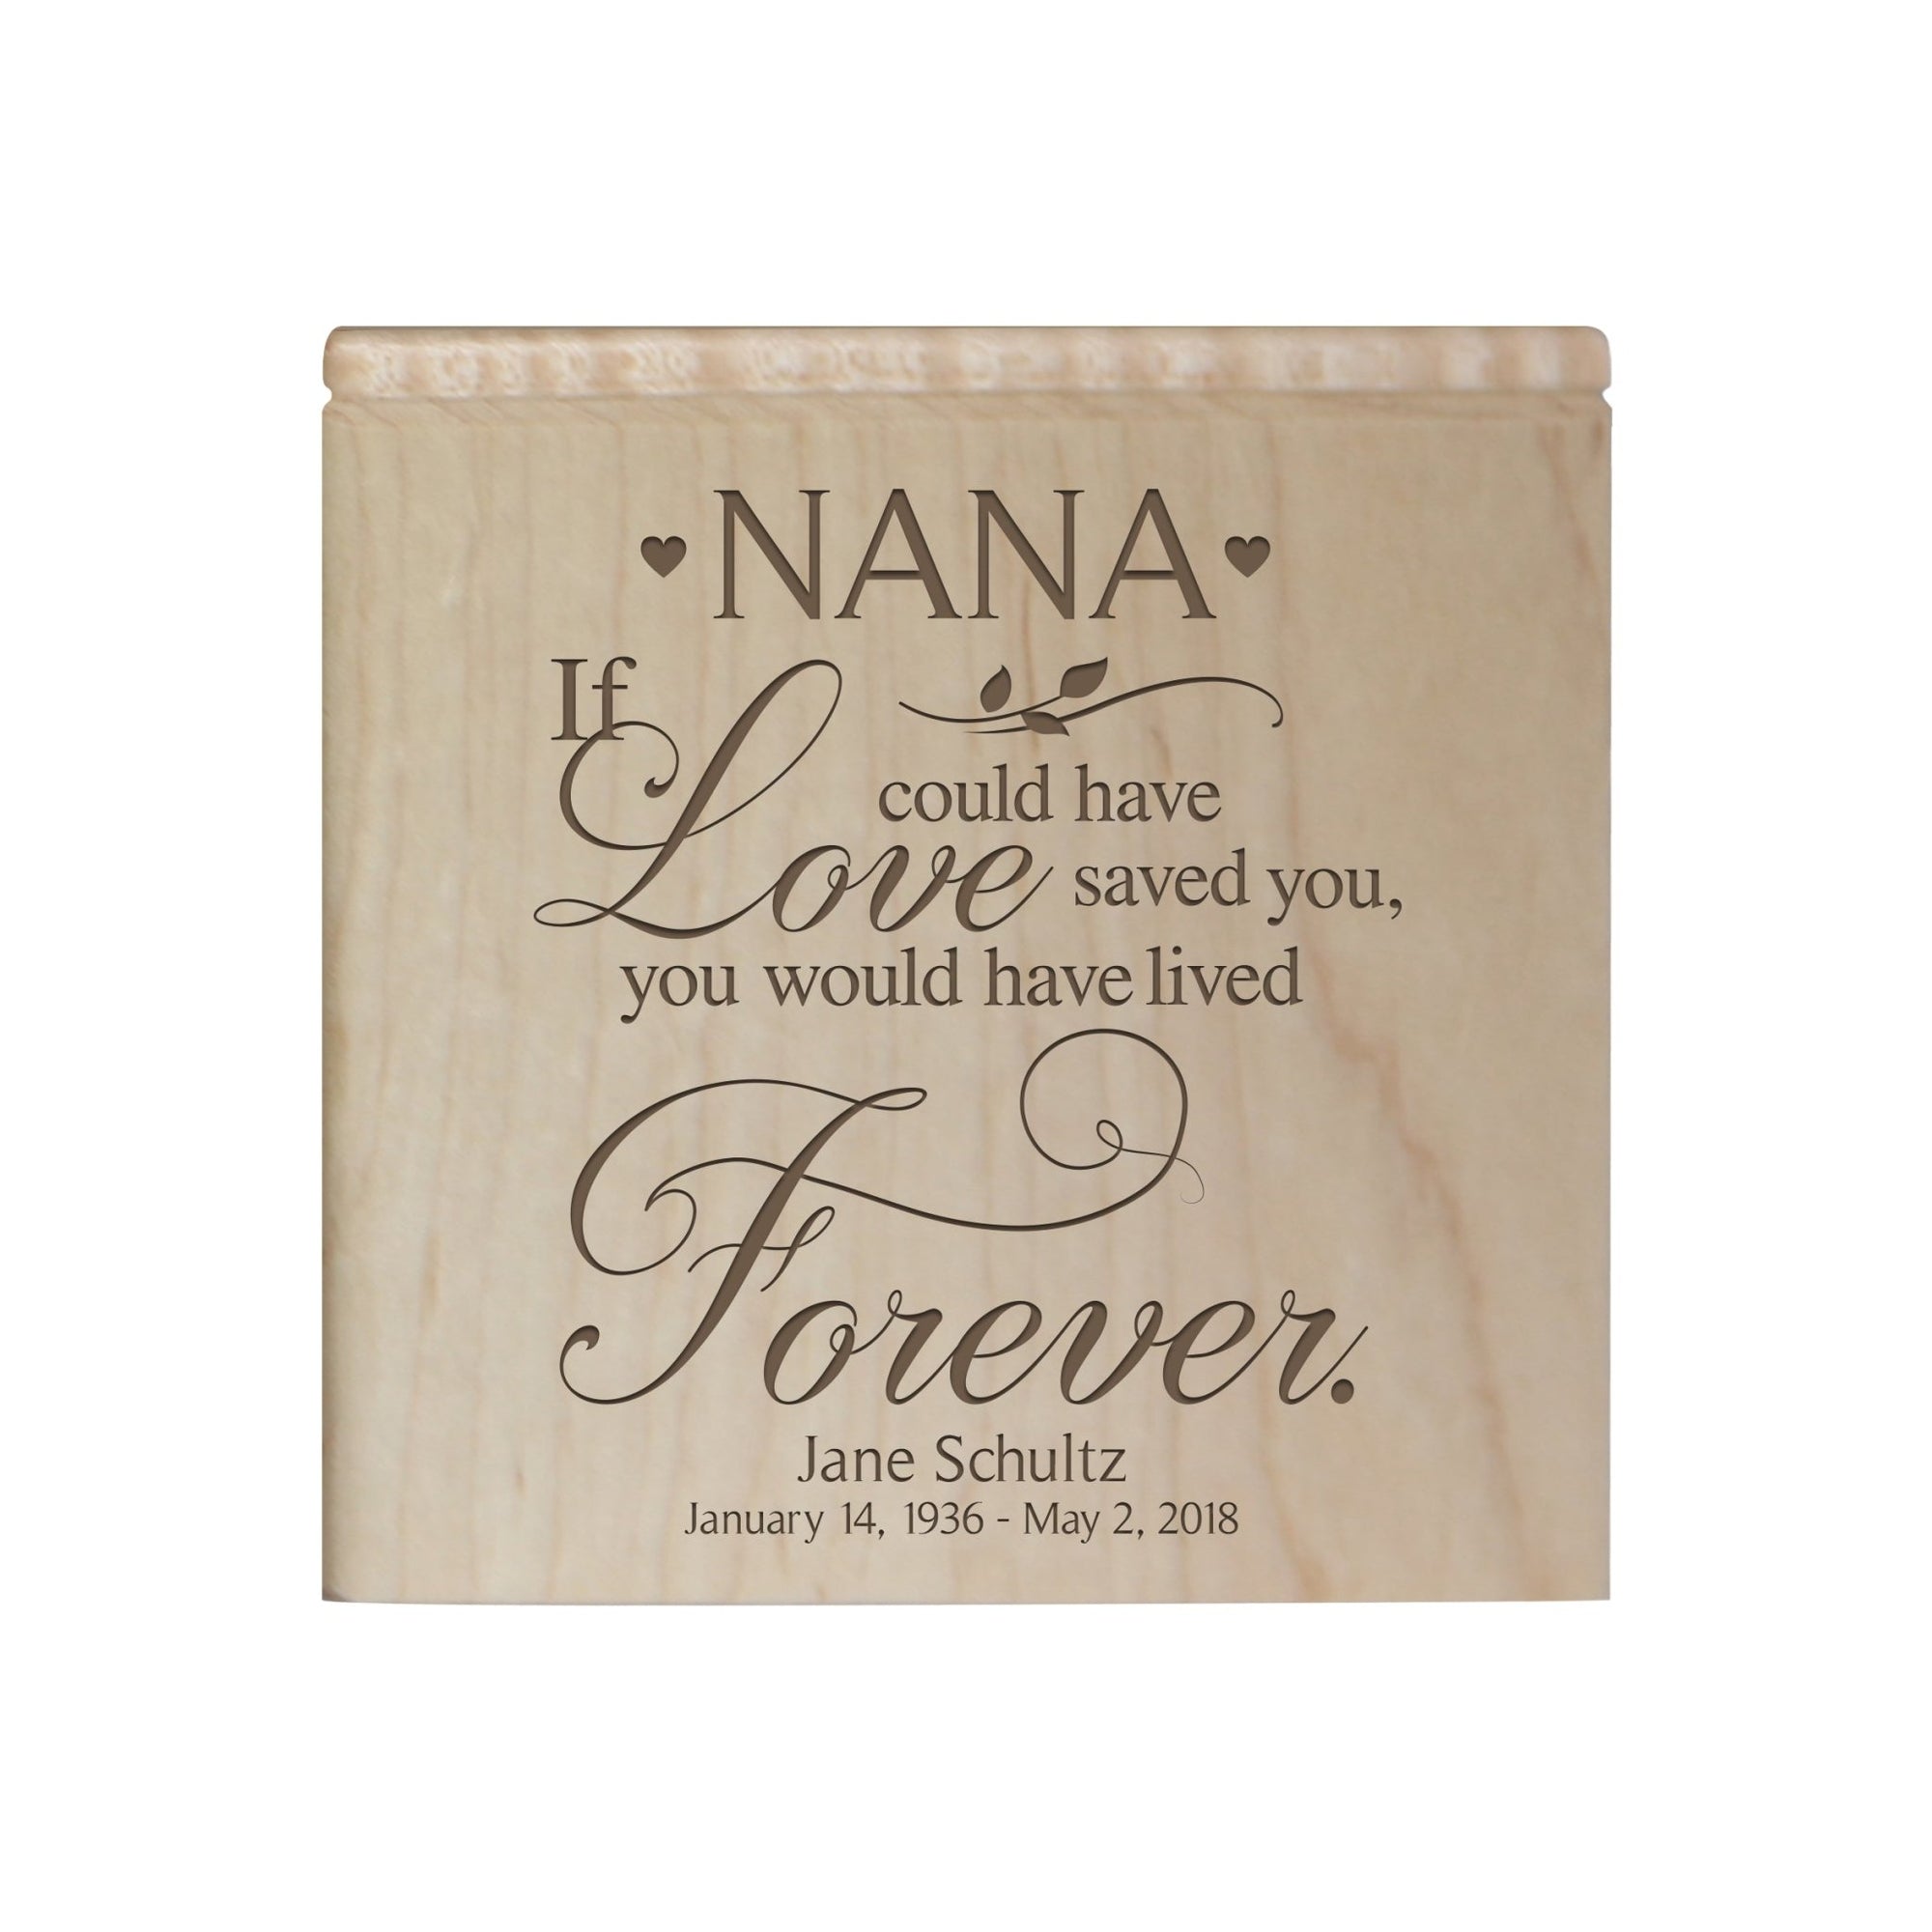 Custom Engraved Memorial Cremation Urn Box Holds 49 Cu Inches Of Human Ashes (If love could have saved Nana) Funeral and Condolence Keepsake - LifeSong Milestones